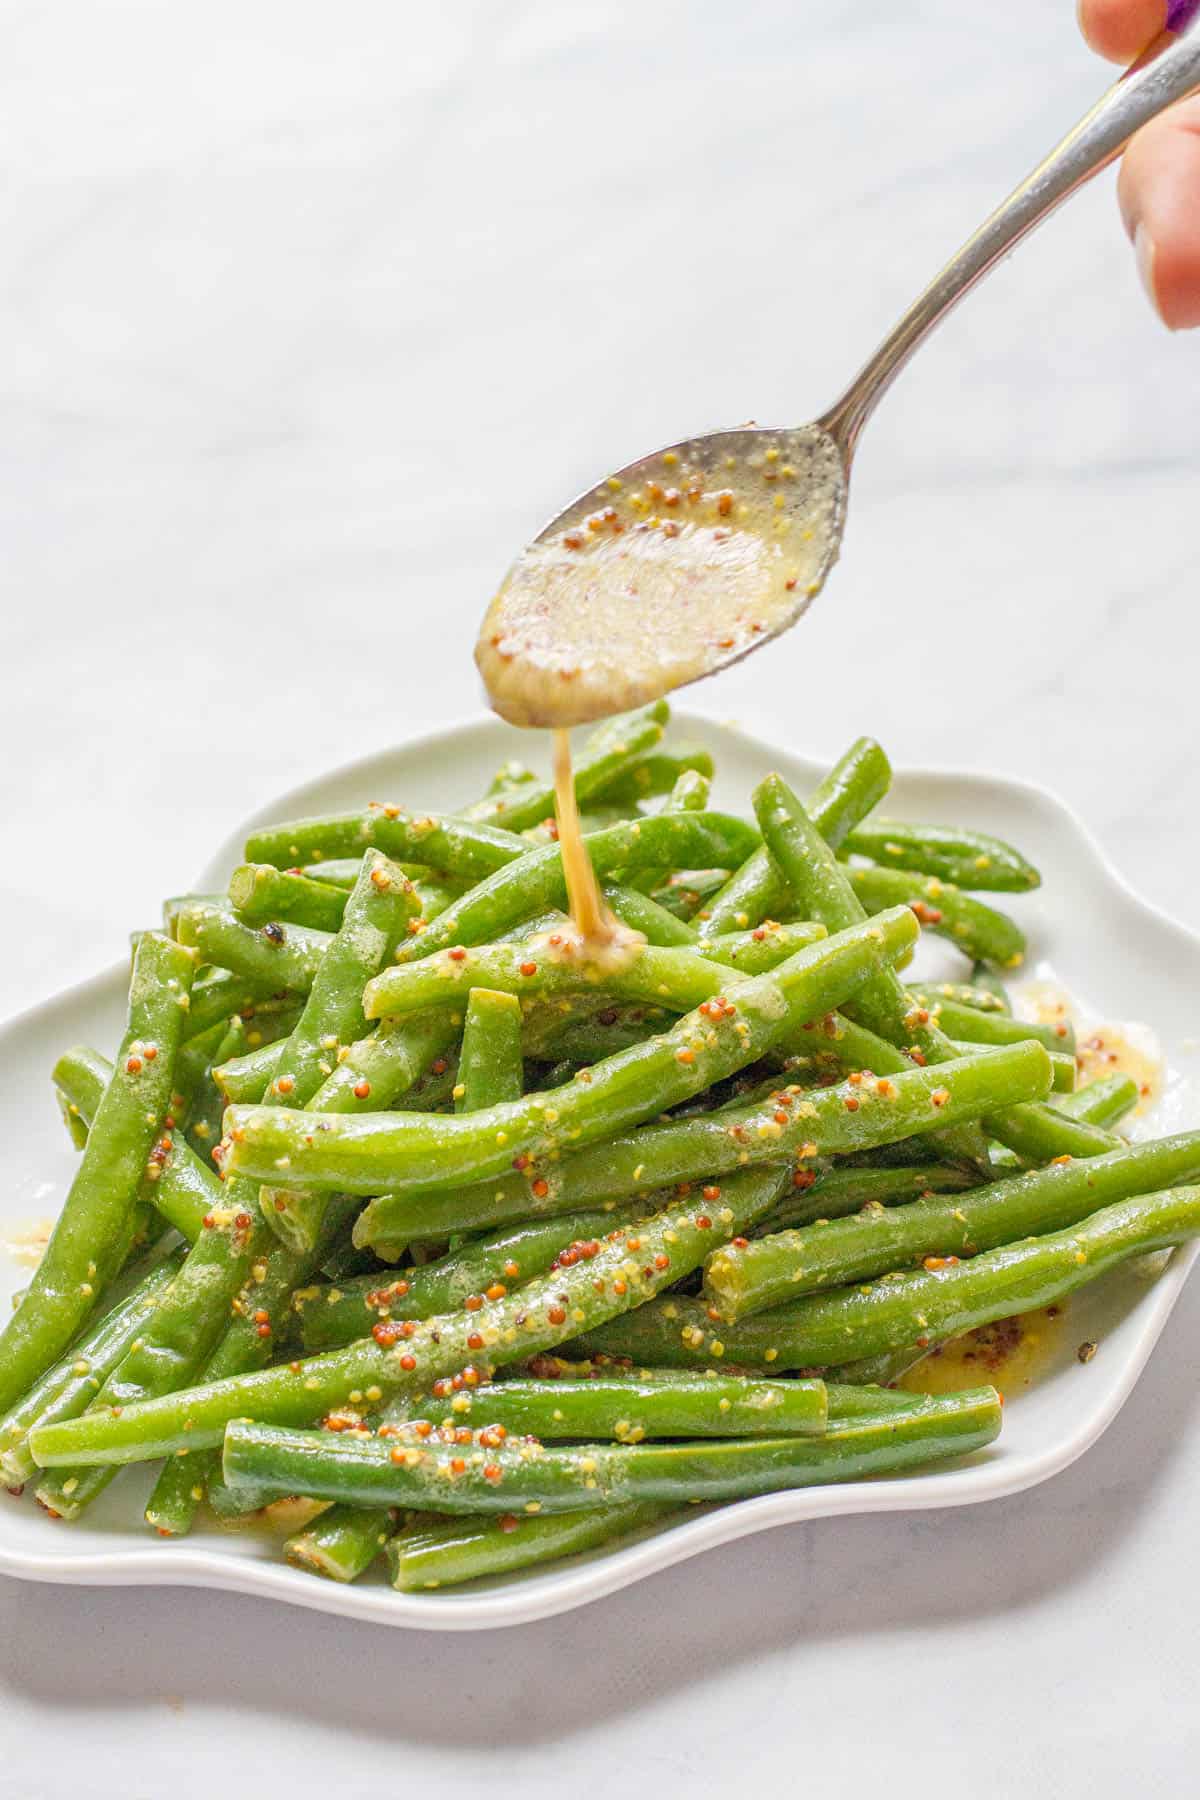 A spoon drizzling some mustard butter sauce over a small serving plate of steamed green beans.